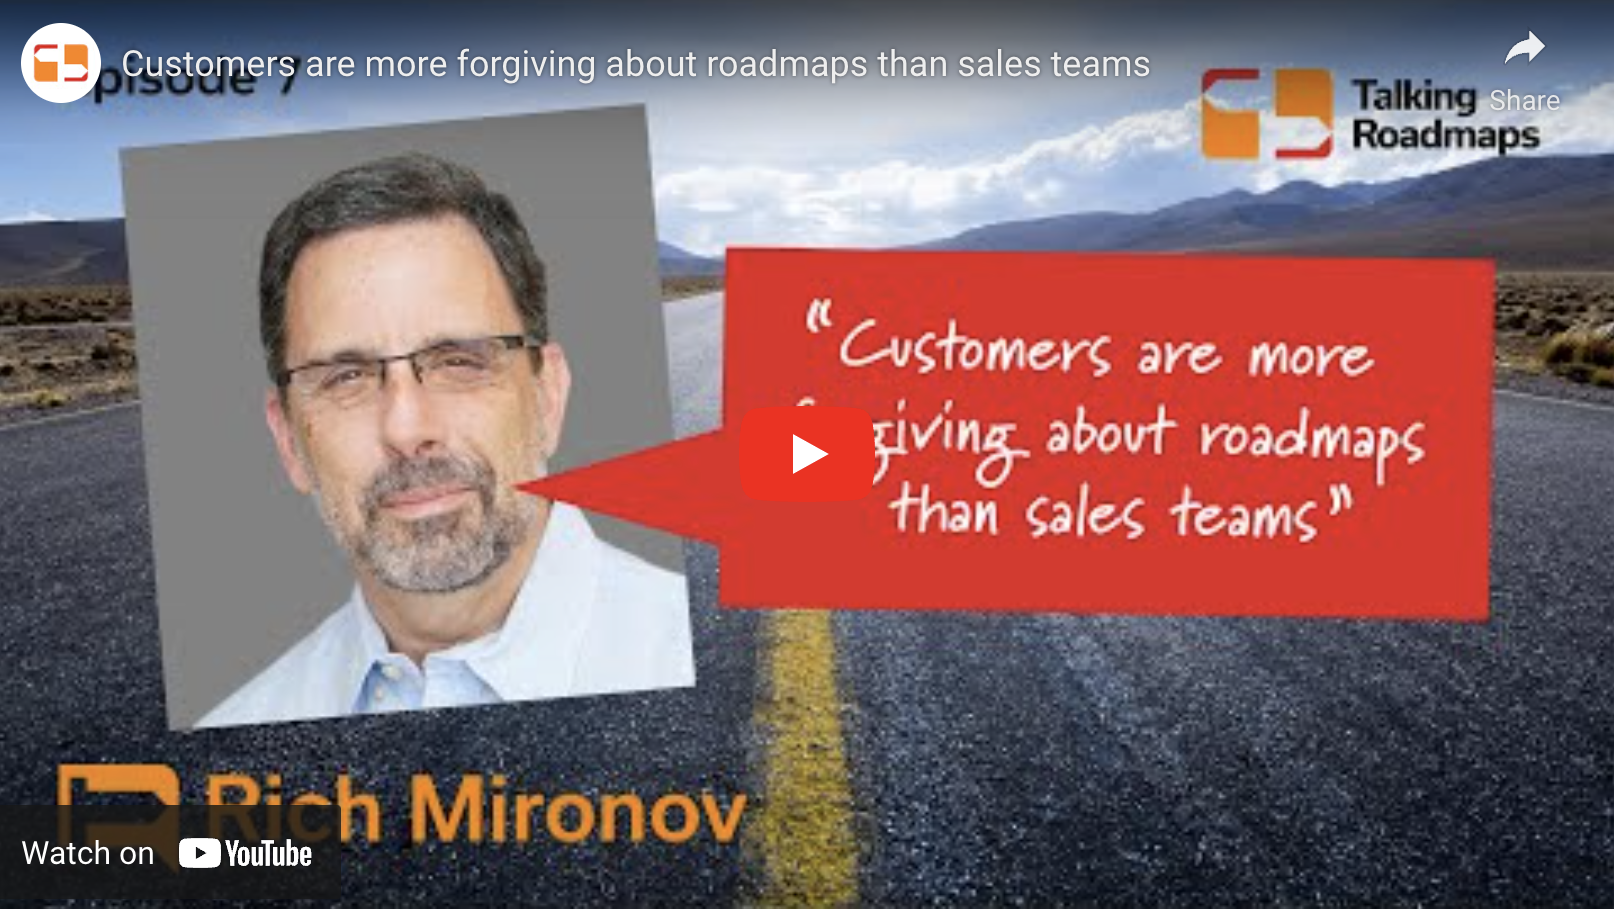 Customers are more forgiving about roadmaps than sales teams